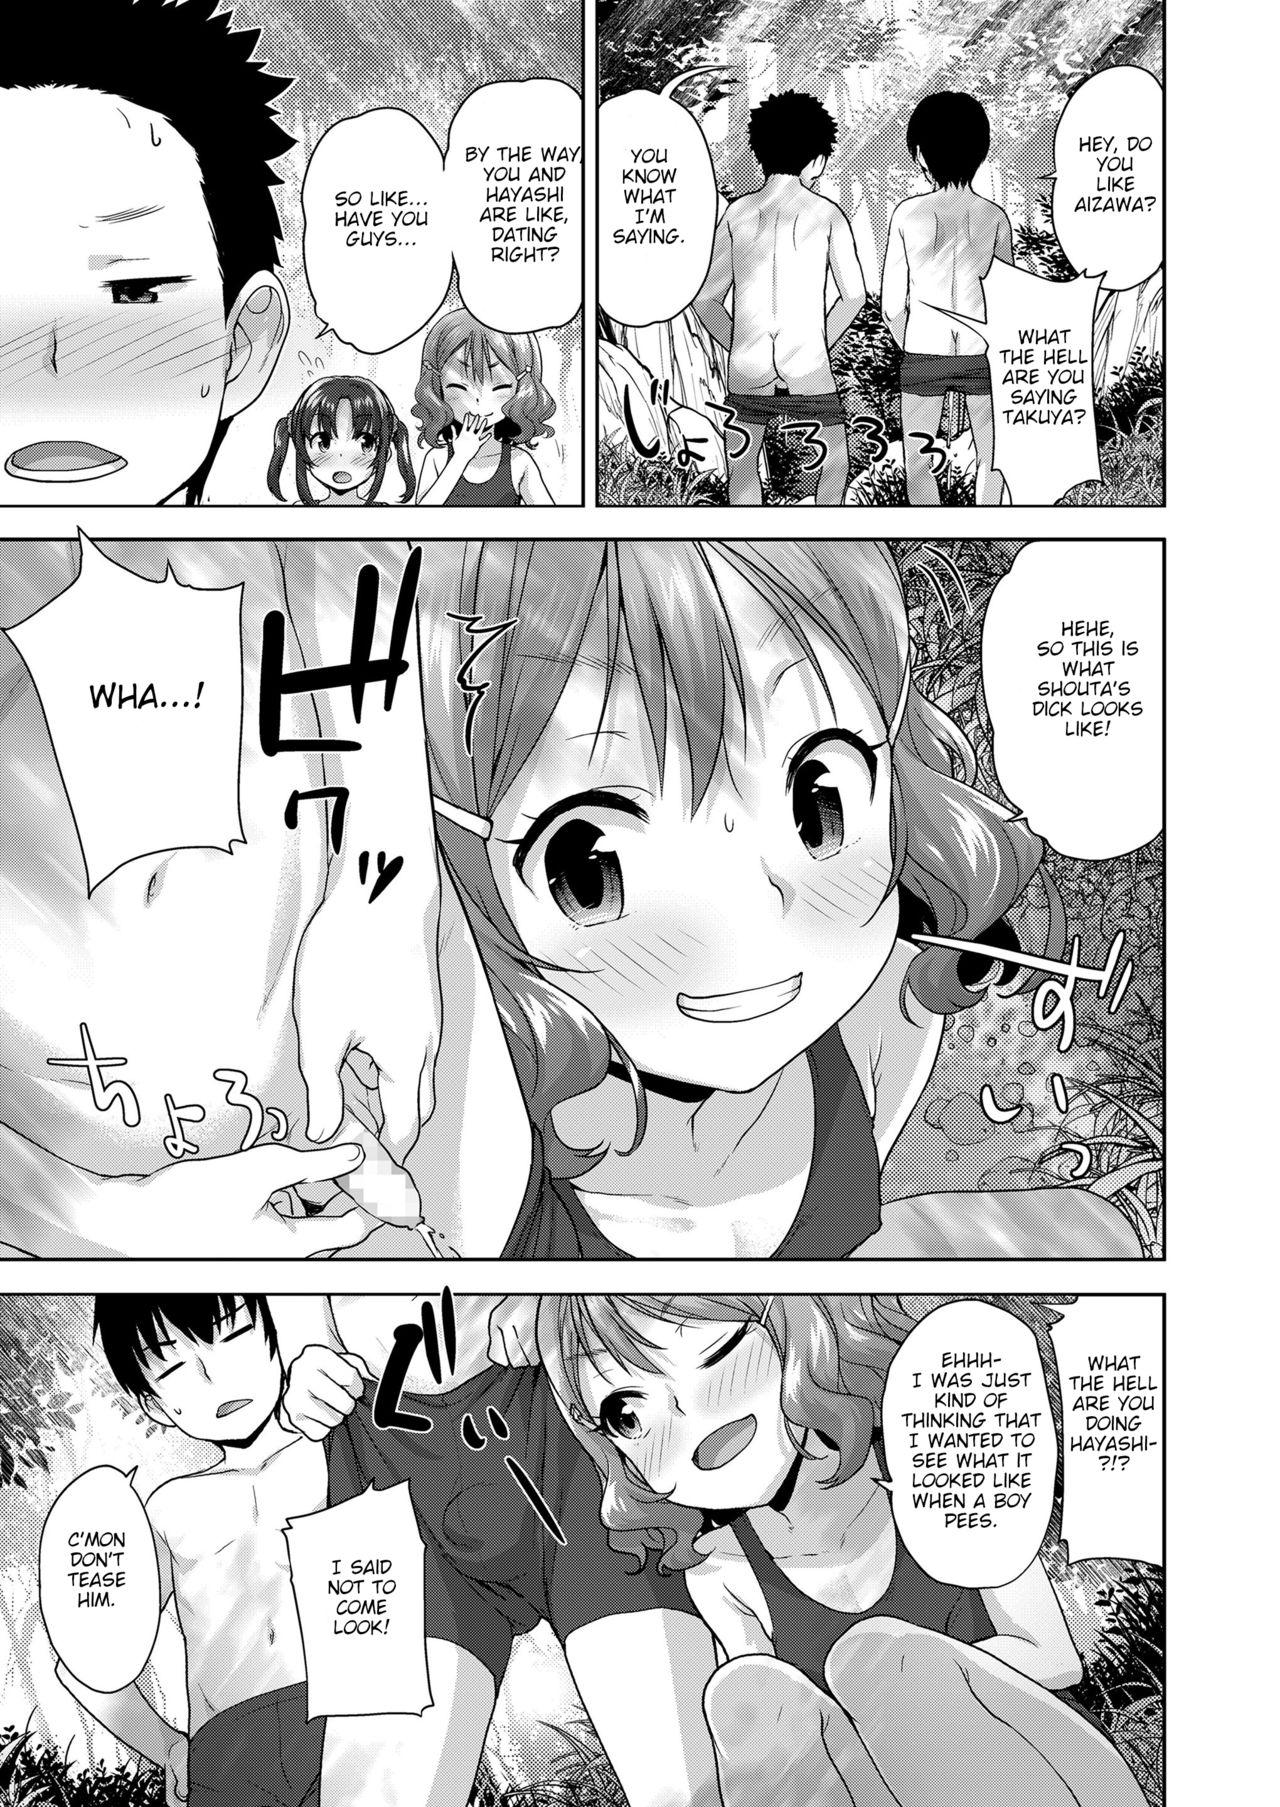 Amigo Issho ni H de Asonjao | Let's do Lewd Things Together! Wanking - Page 3